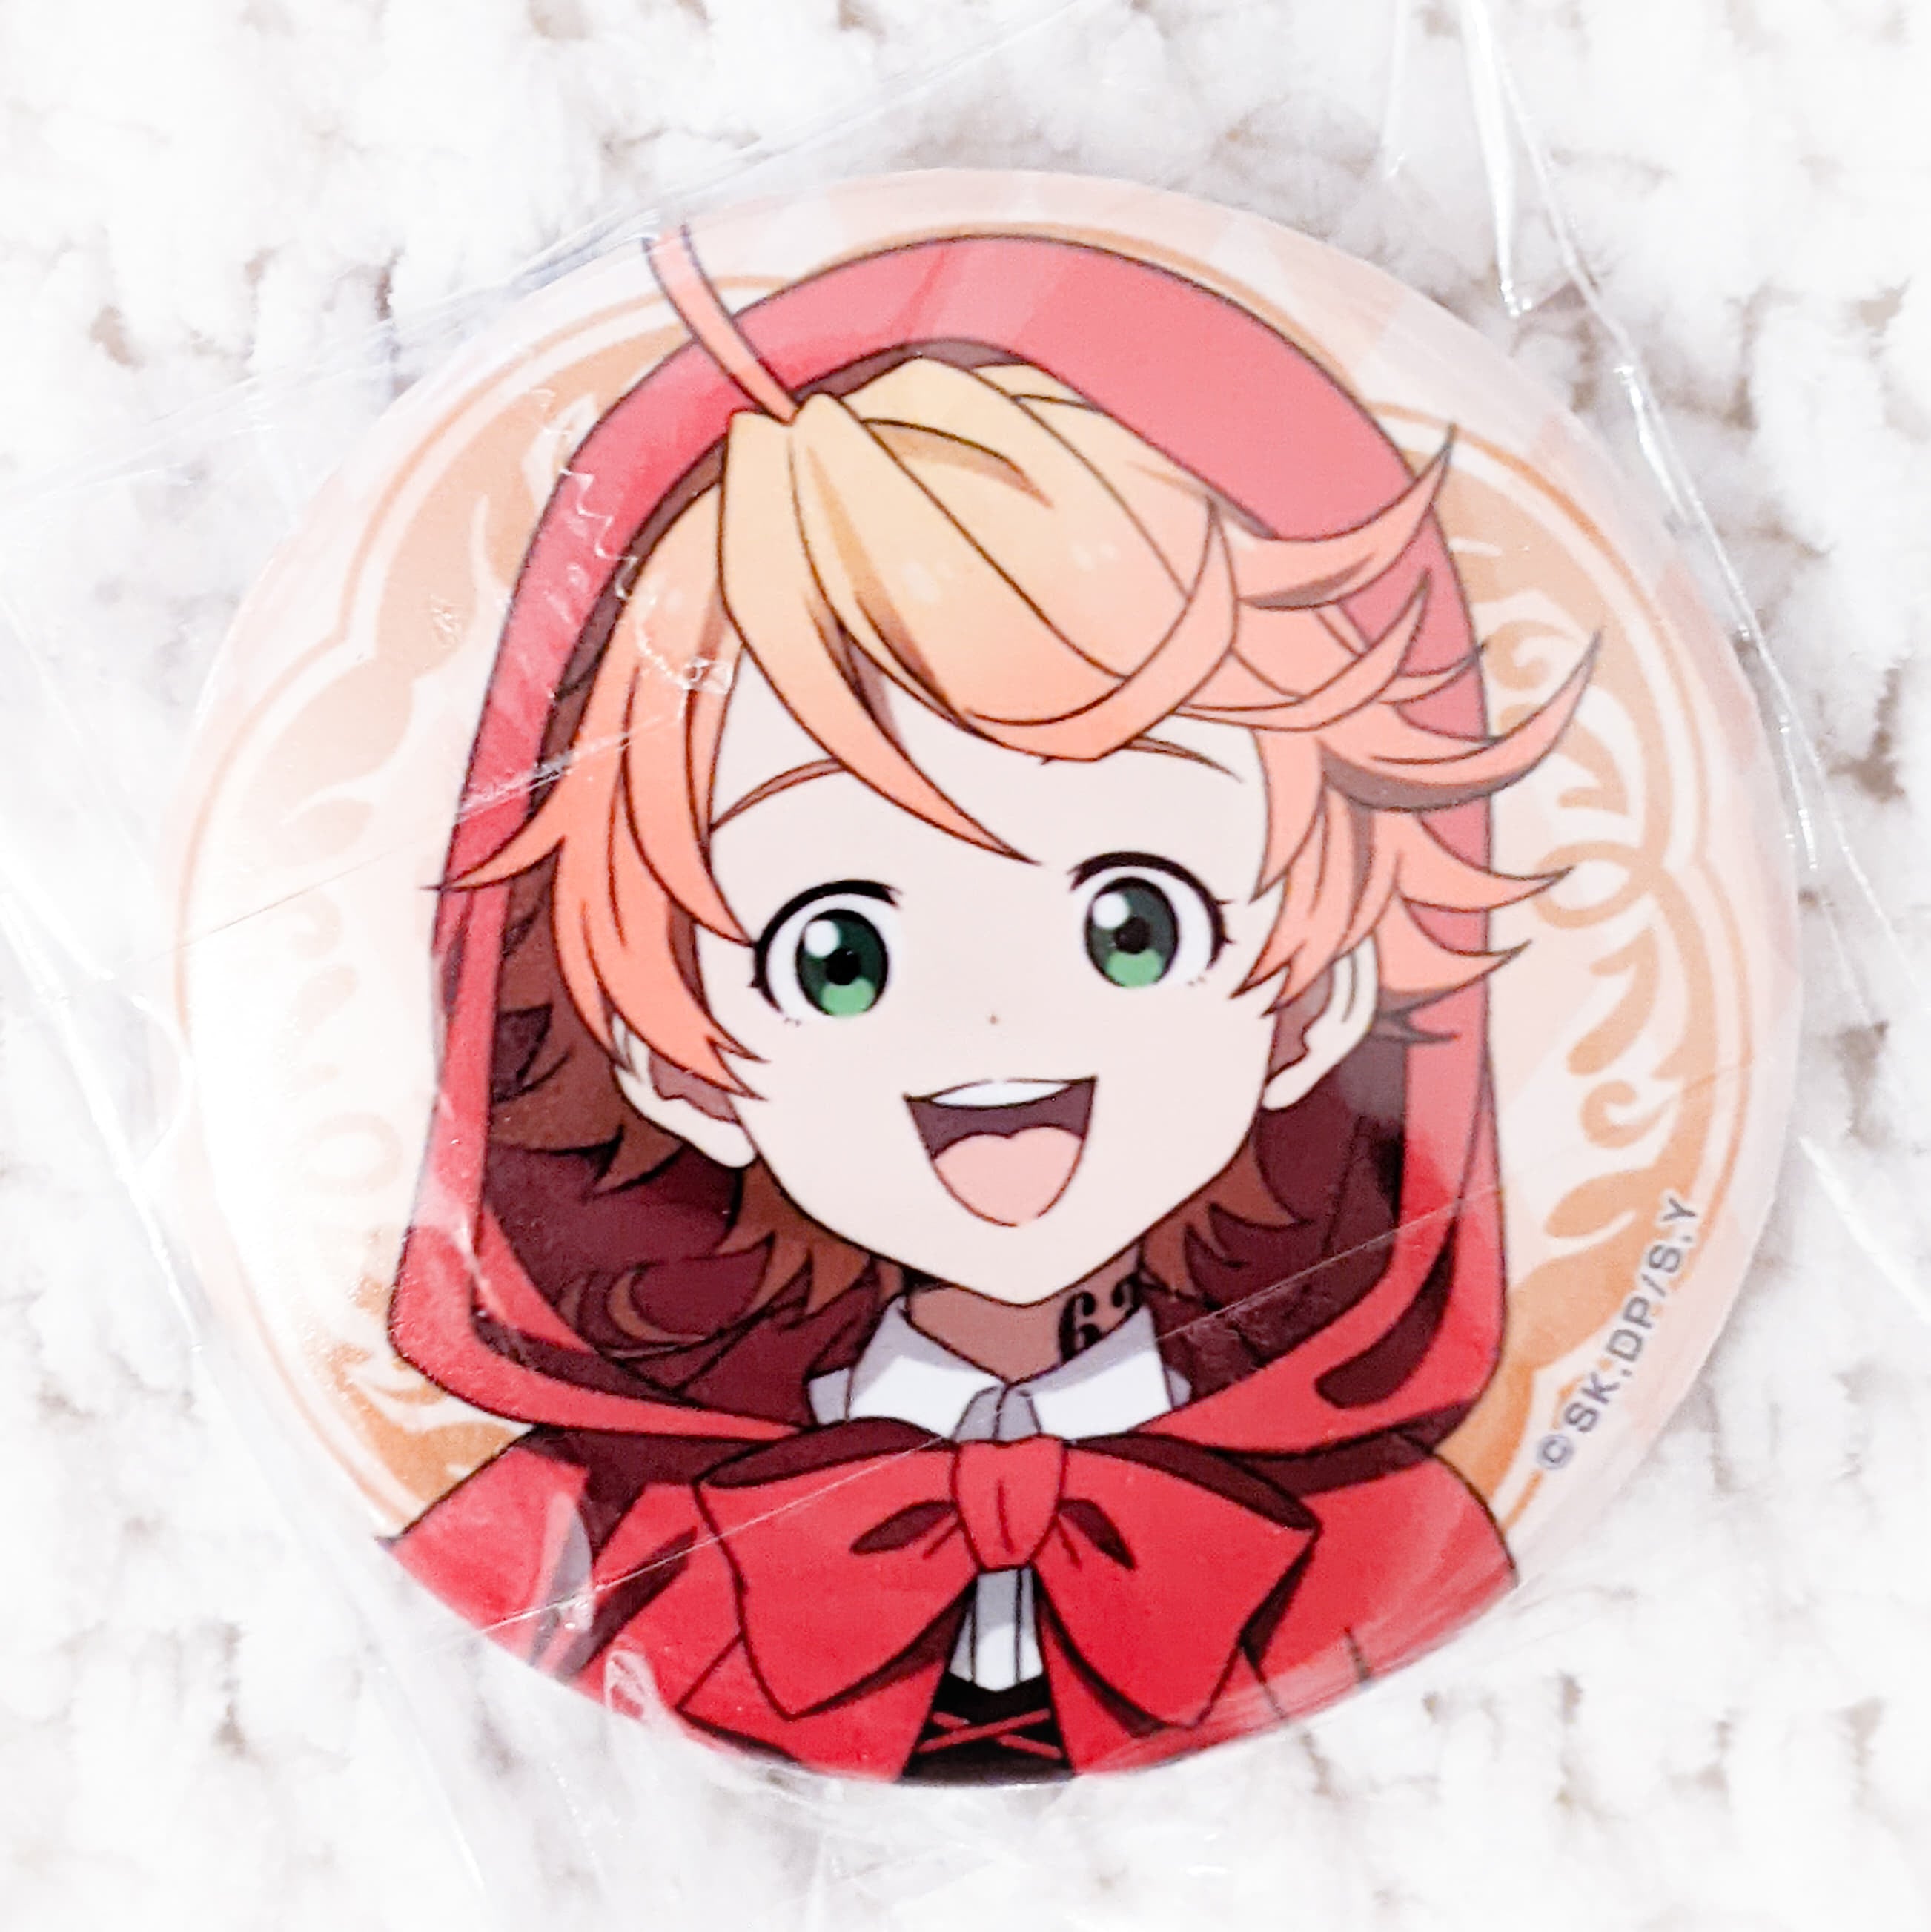 The Promised Neverland Can Badge / Norman Marine (Anime Toy